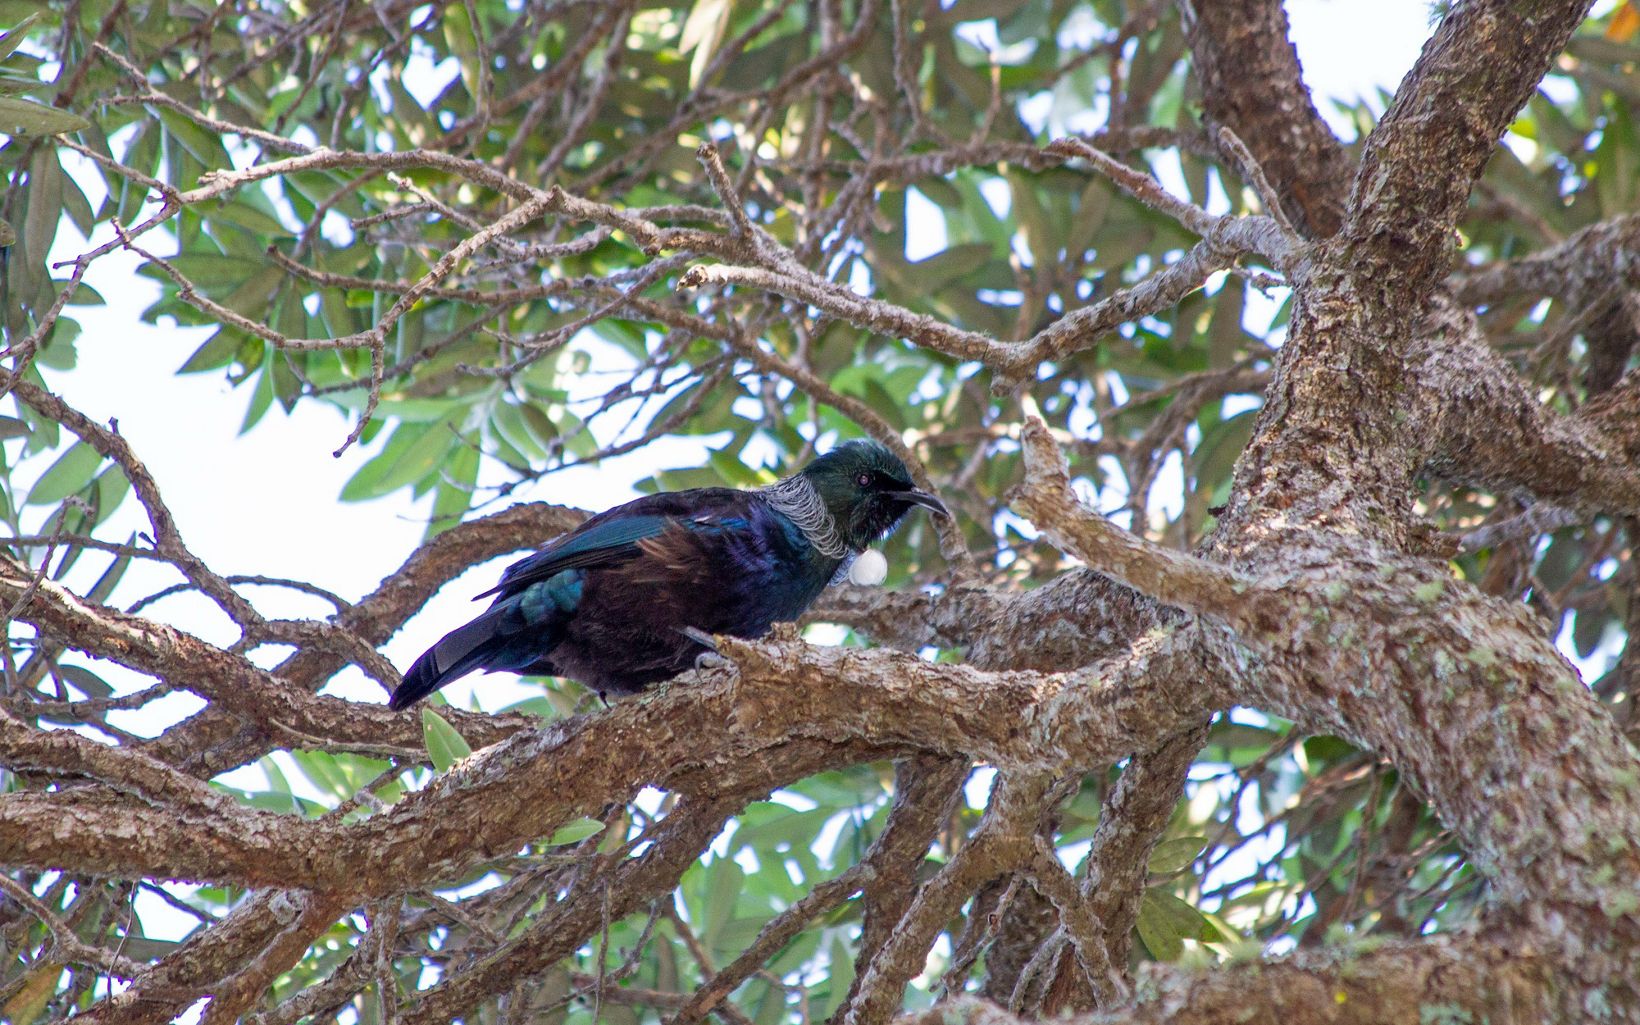 An endemic species that can be found throughout Aotearoa New Zealand, the Tui can imitate sound much like a parrot and has two small white tufts of feathers at its neck.